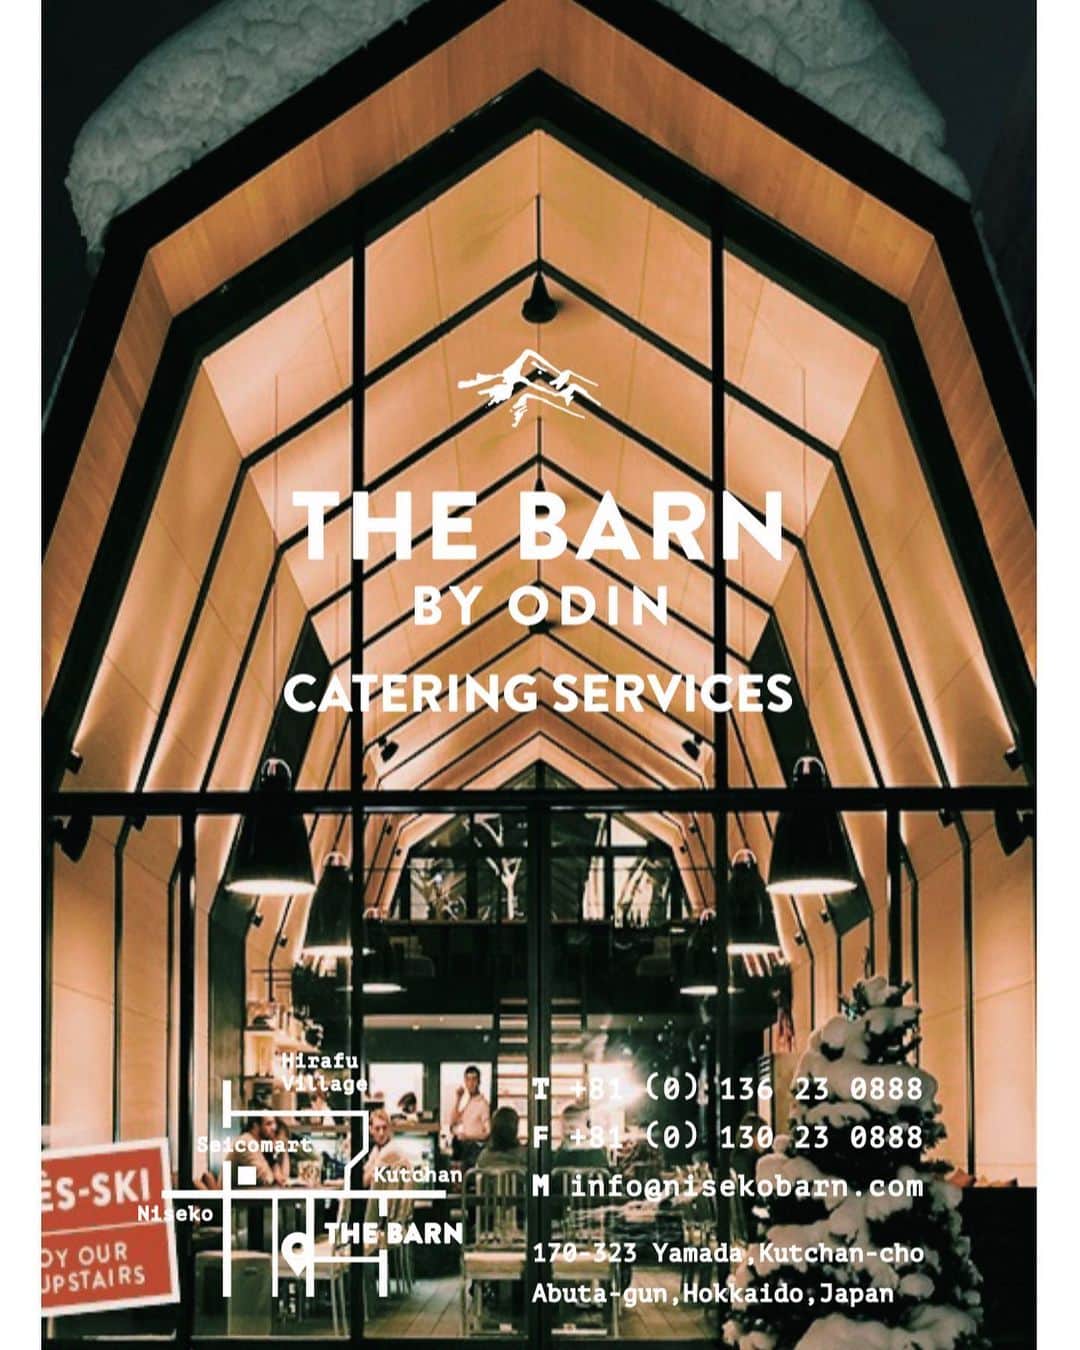 The Barn by Odinのインスタグラム：「✴︎﻿ “Catering our Omotenashi Hospitality “﻿ ﻿ 【The Barn New Service】﻿ Why don’t you try something special in Niseko other than snow? Bring our Omotenashi hospitality to your place.﻿ ﻿ 【Reservation】﻿ Tell : +81-136-23-0888﻿ Email : info@nisekobarn.com﻿ ﻿ #nisekorestaurant#hokkaodo#nisekodining#ski#niseko#hirahu#barn#thebarn#thebarnbyodin#catering#chef#specialdinner」